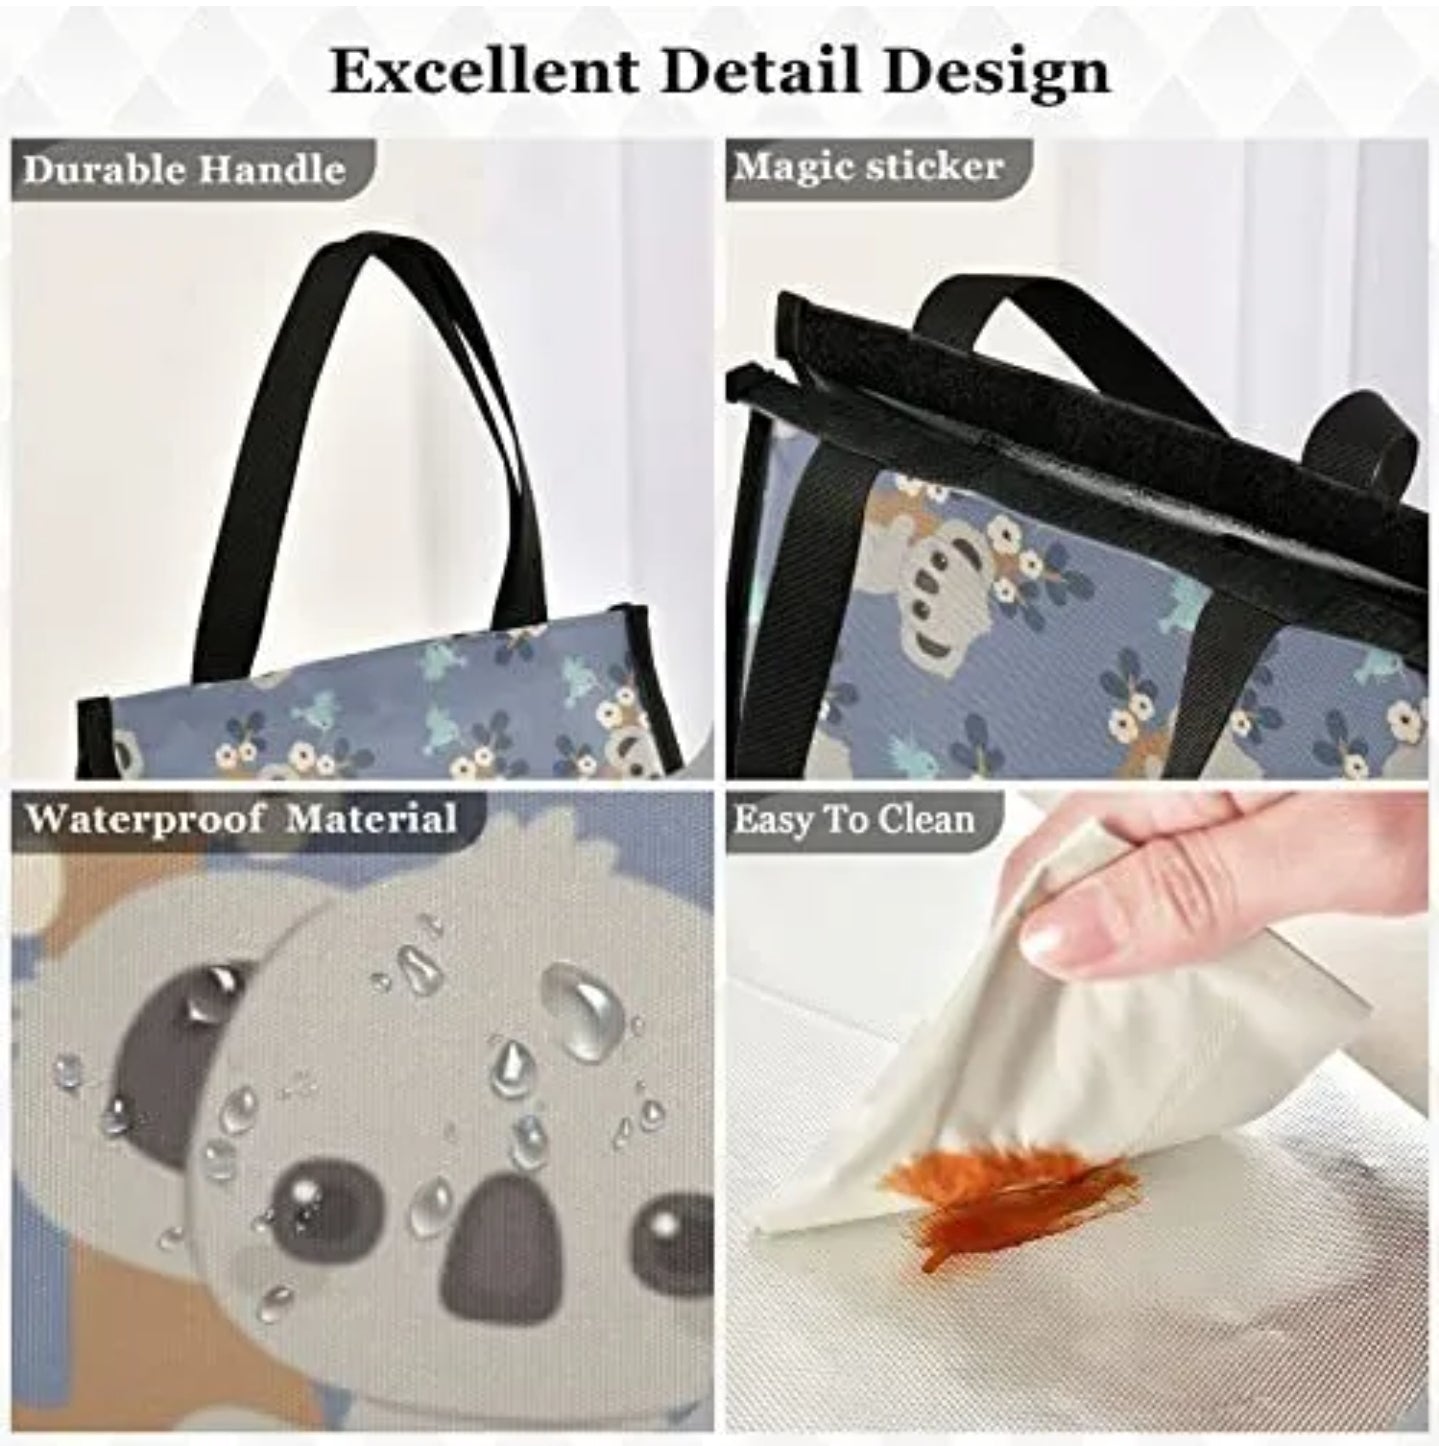 Koala Insulated Lunch Tote